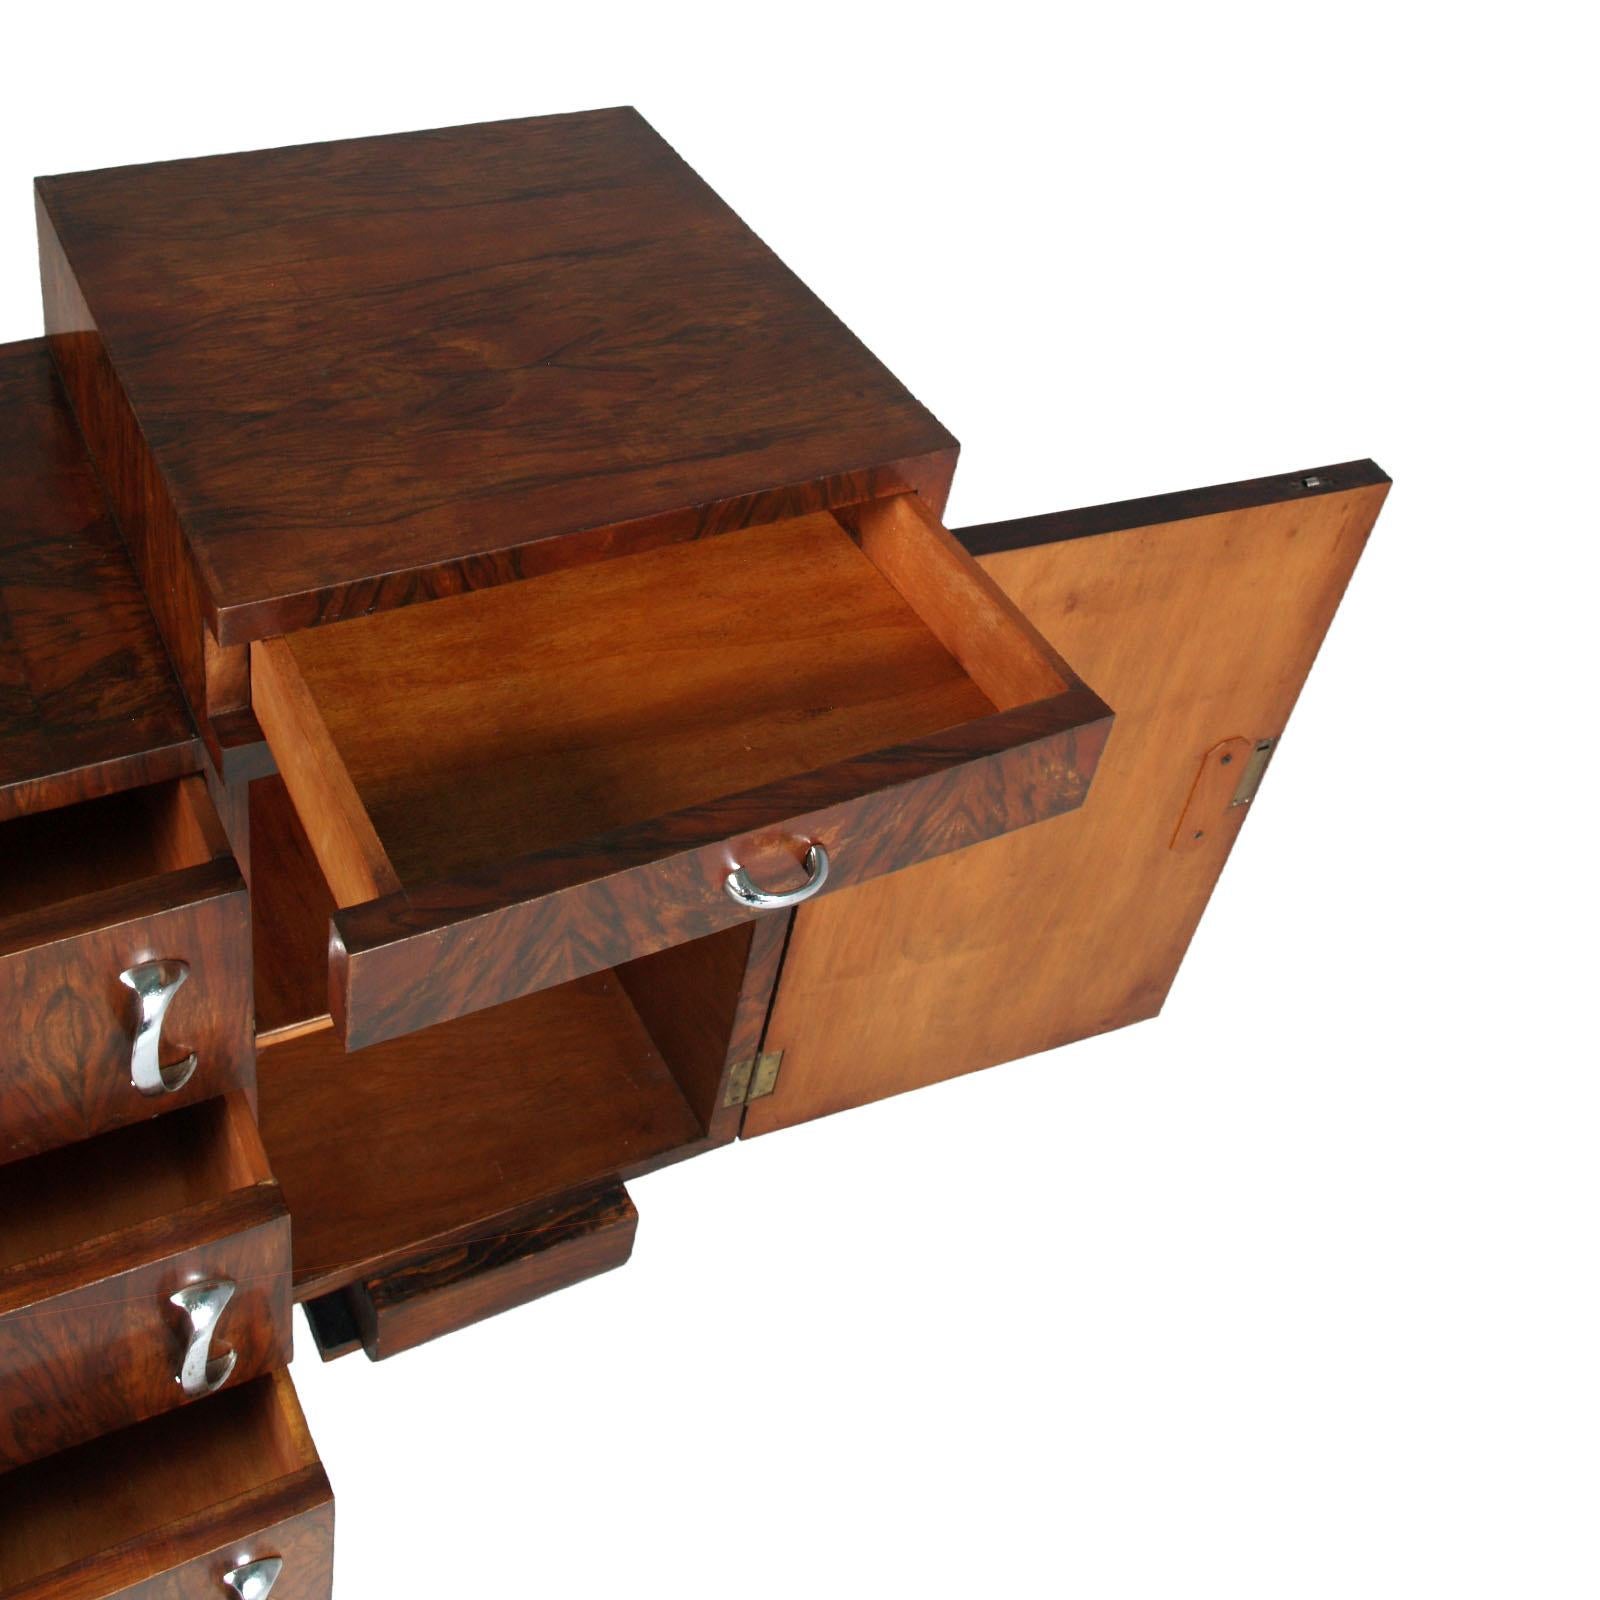 1930s Chest of Drawers, Commode, Credenza Art Deco by Guglielmo Urlich for Ar.Ca For Sale 3